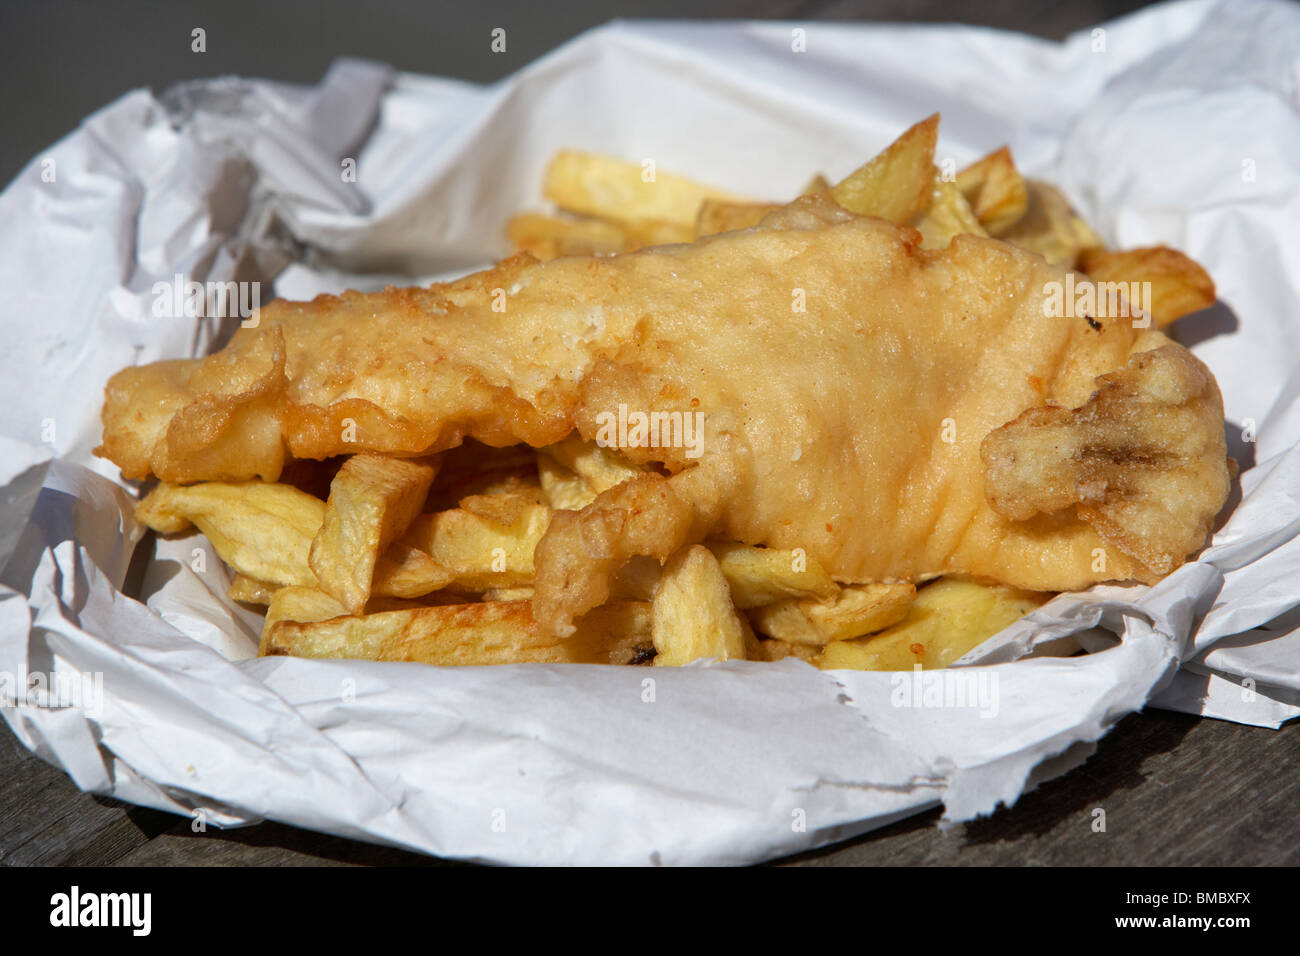 La morue anglais traditionnel fish and chips england uk Banque D'Images